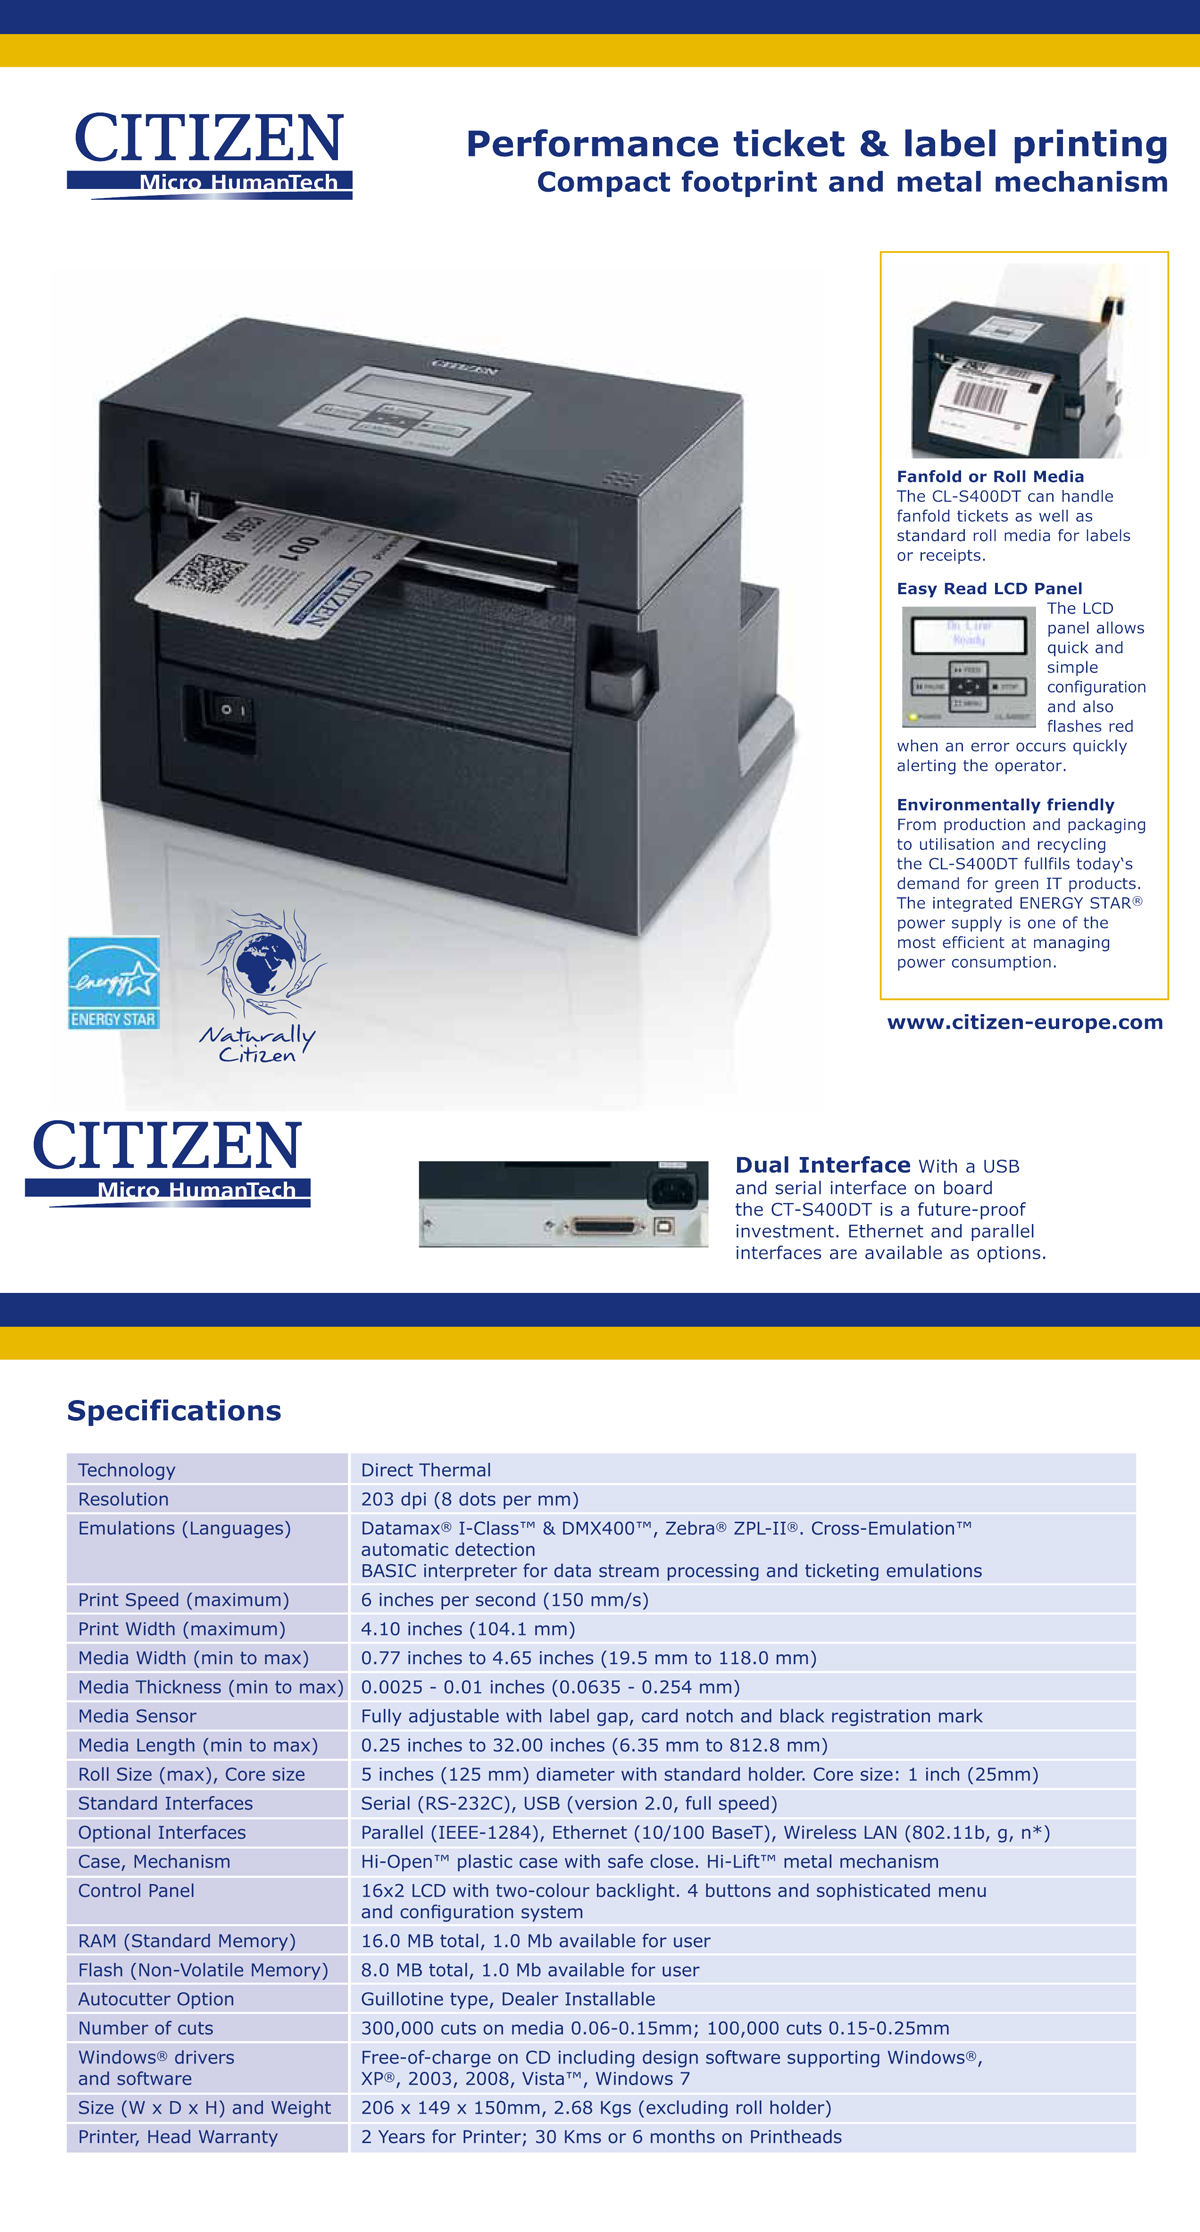 performance ticket&label printing compact footprint and metal mechanism ram 16.0 mb total 1.0mb available for user